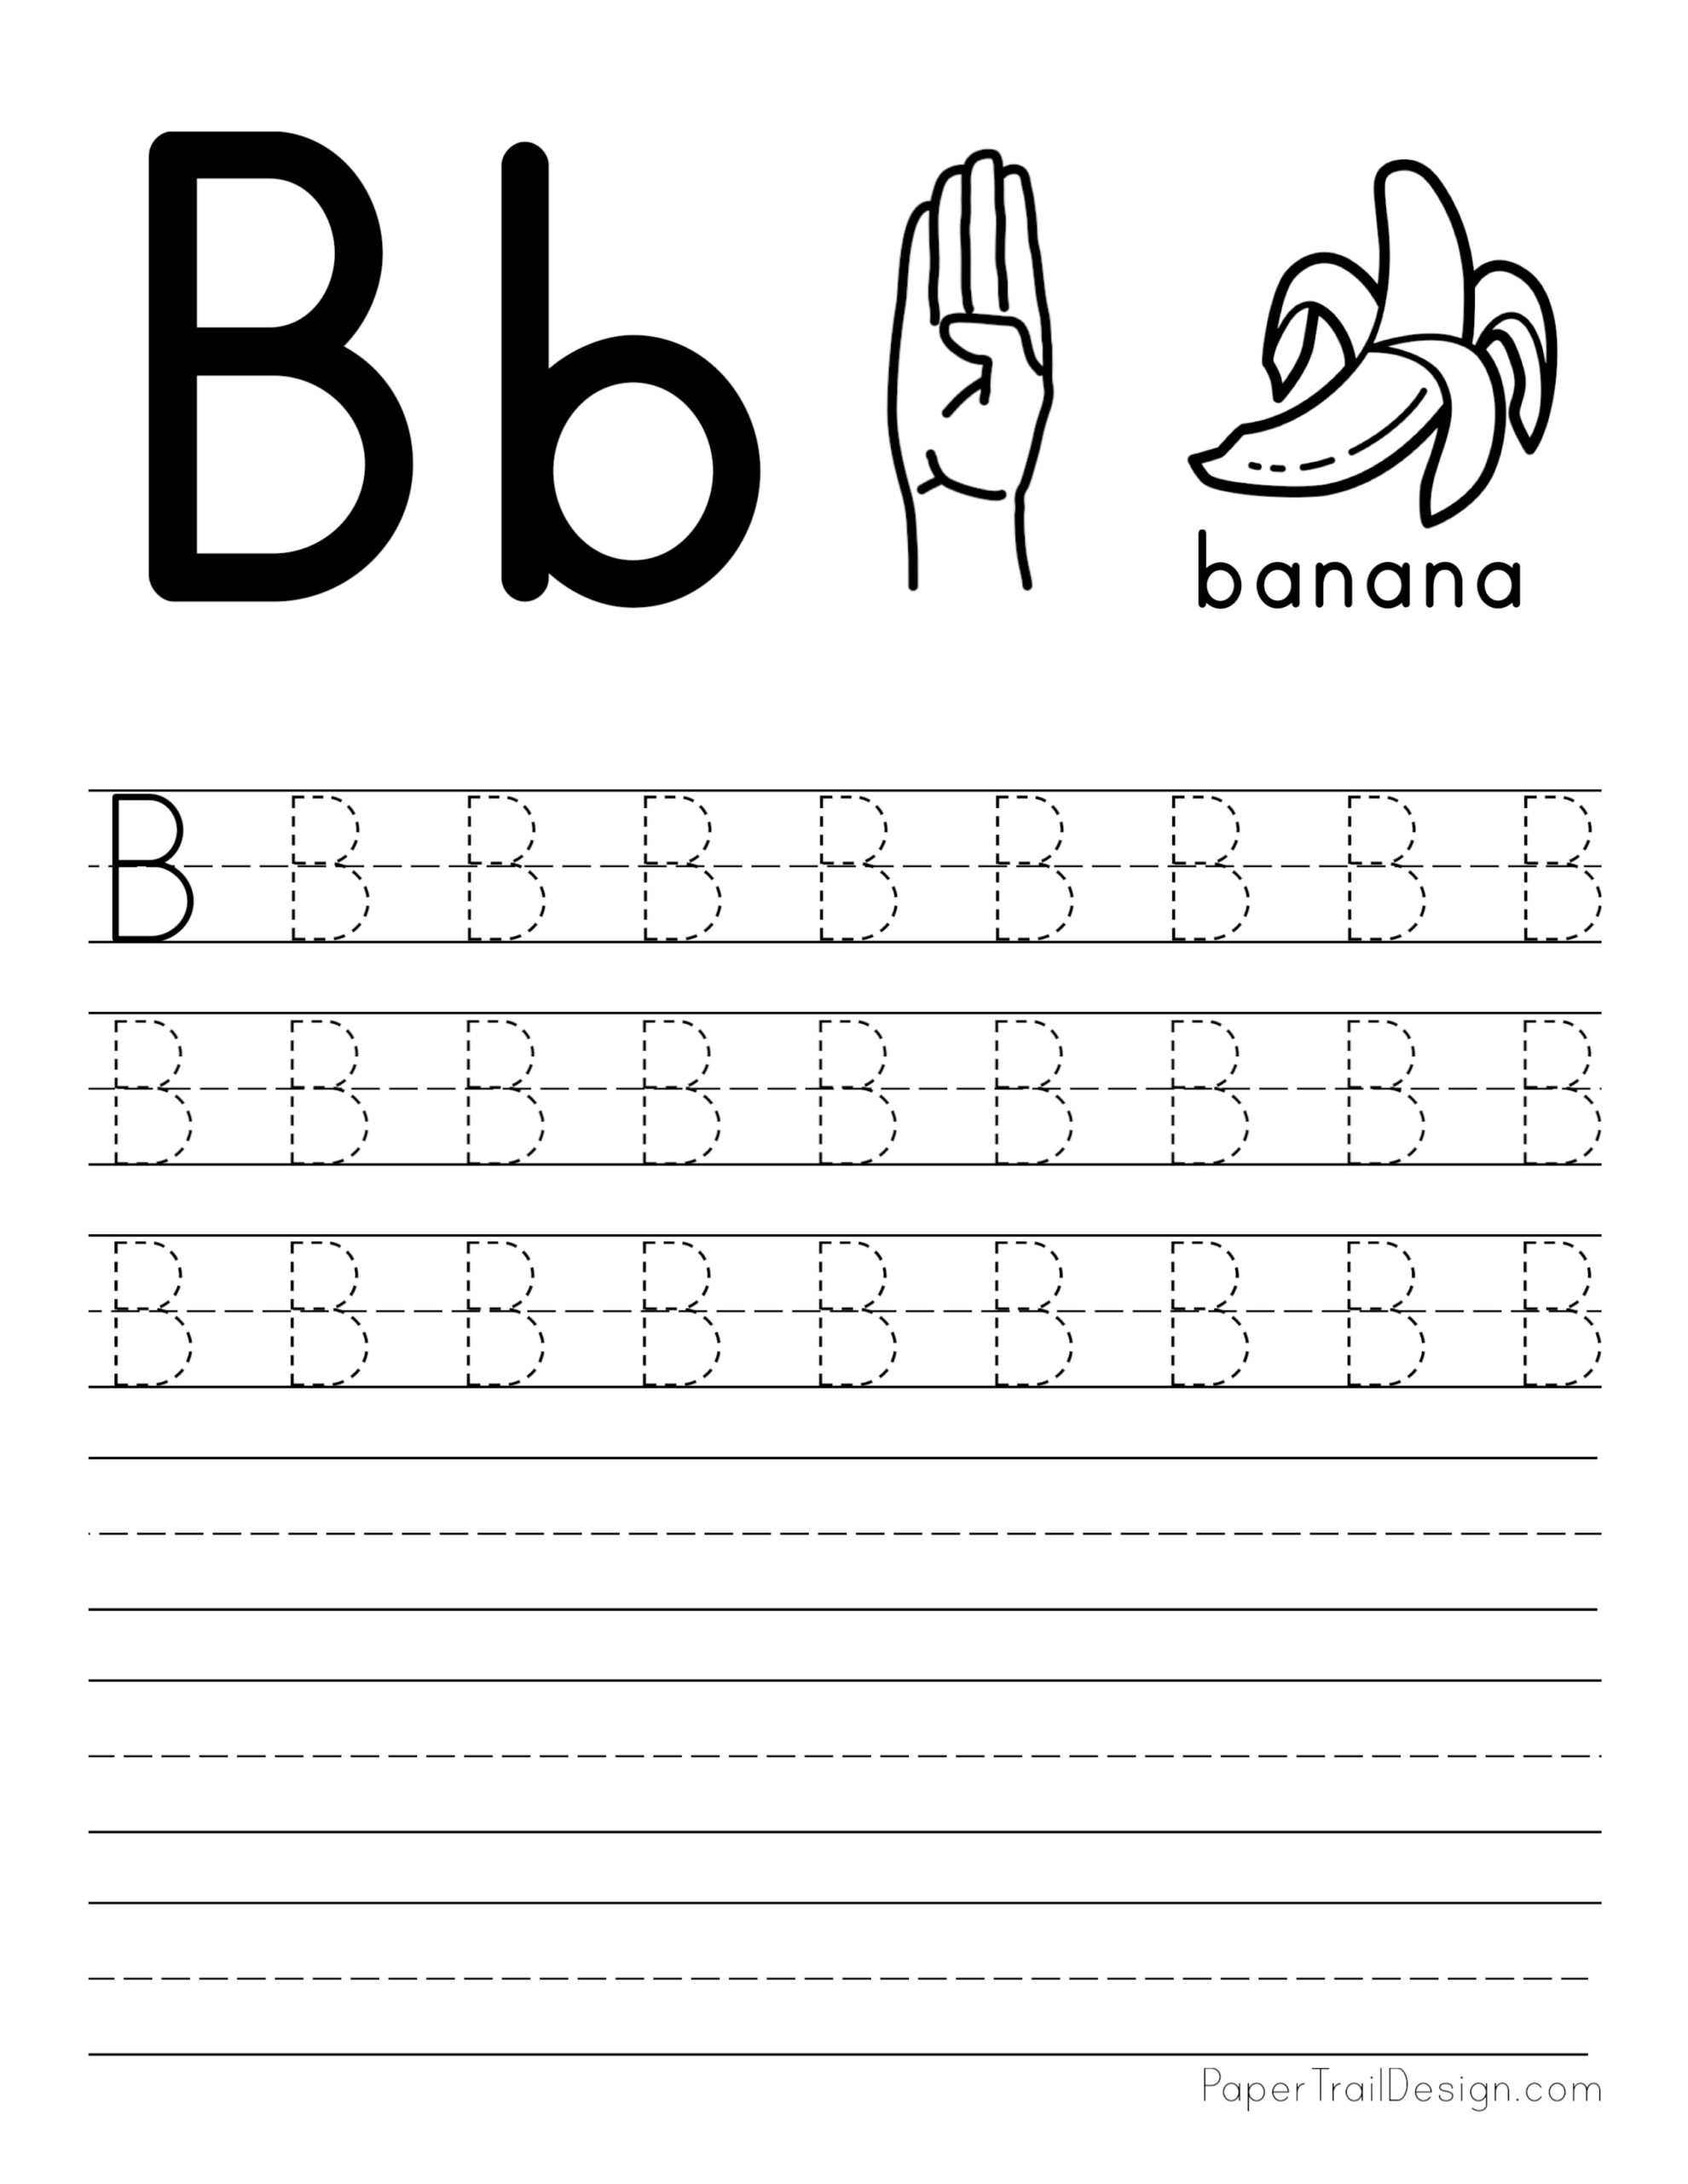 Free Alphabet Tracing Worksheets (printable) - The Activity Mom